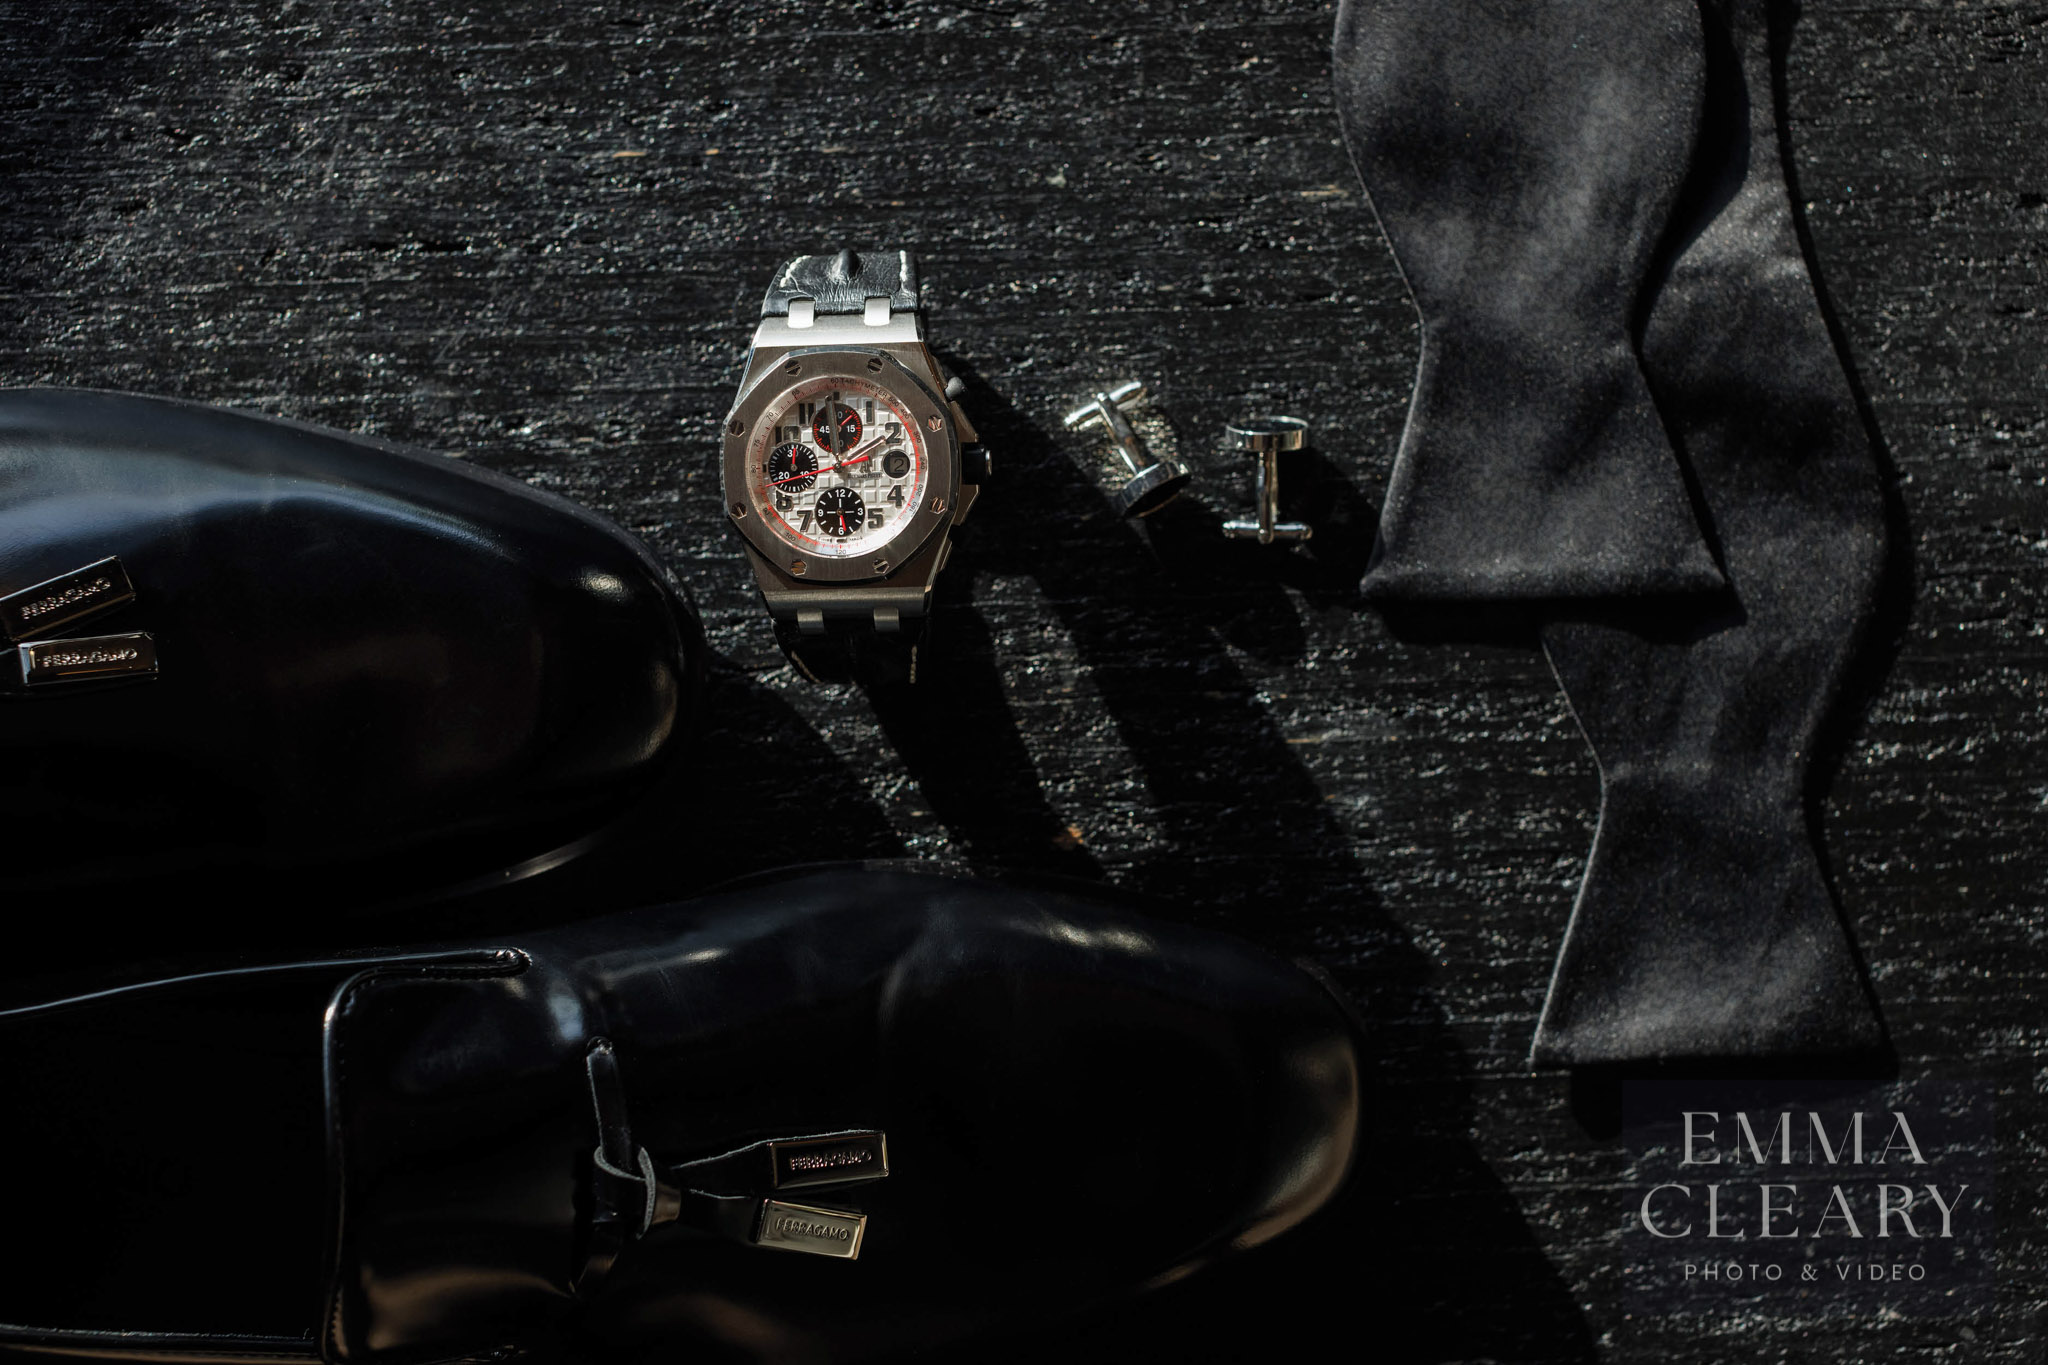 Groom's watches, tie and shoes